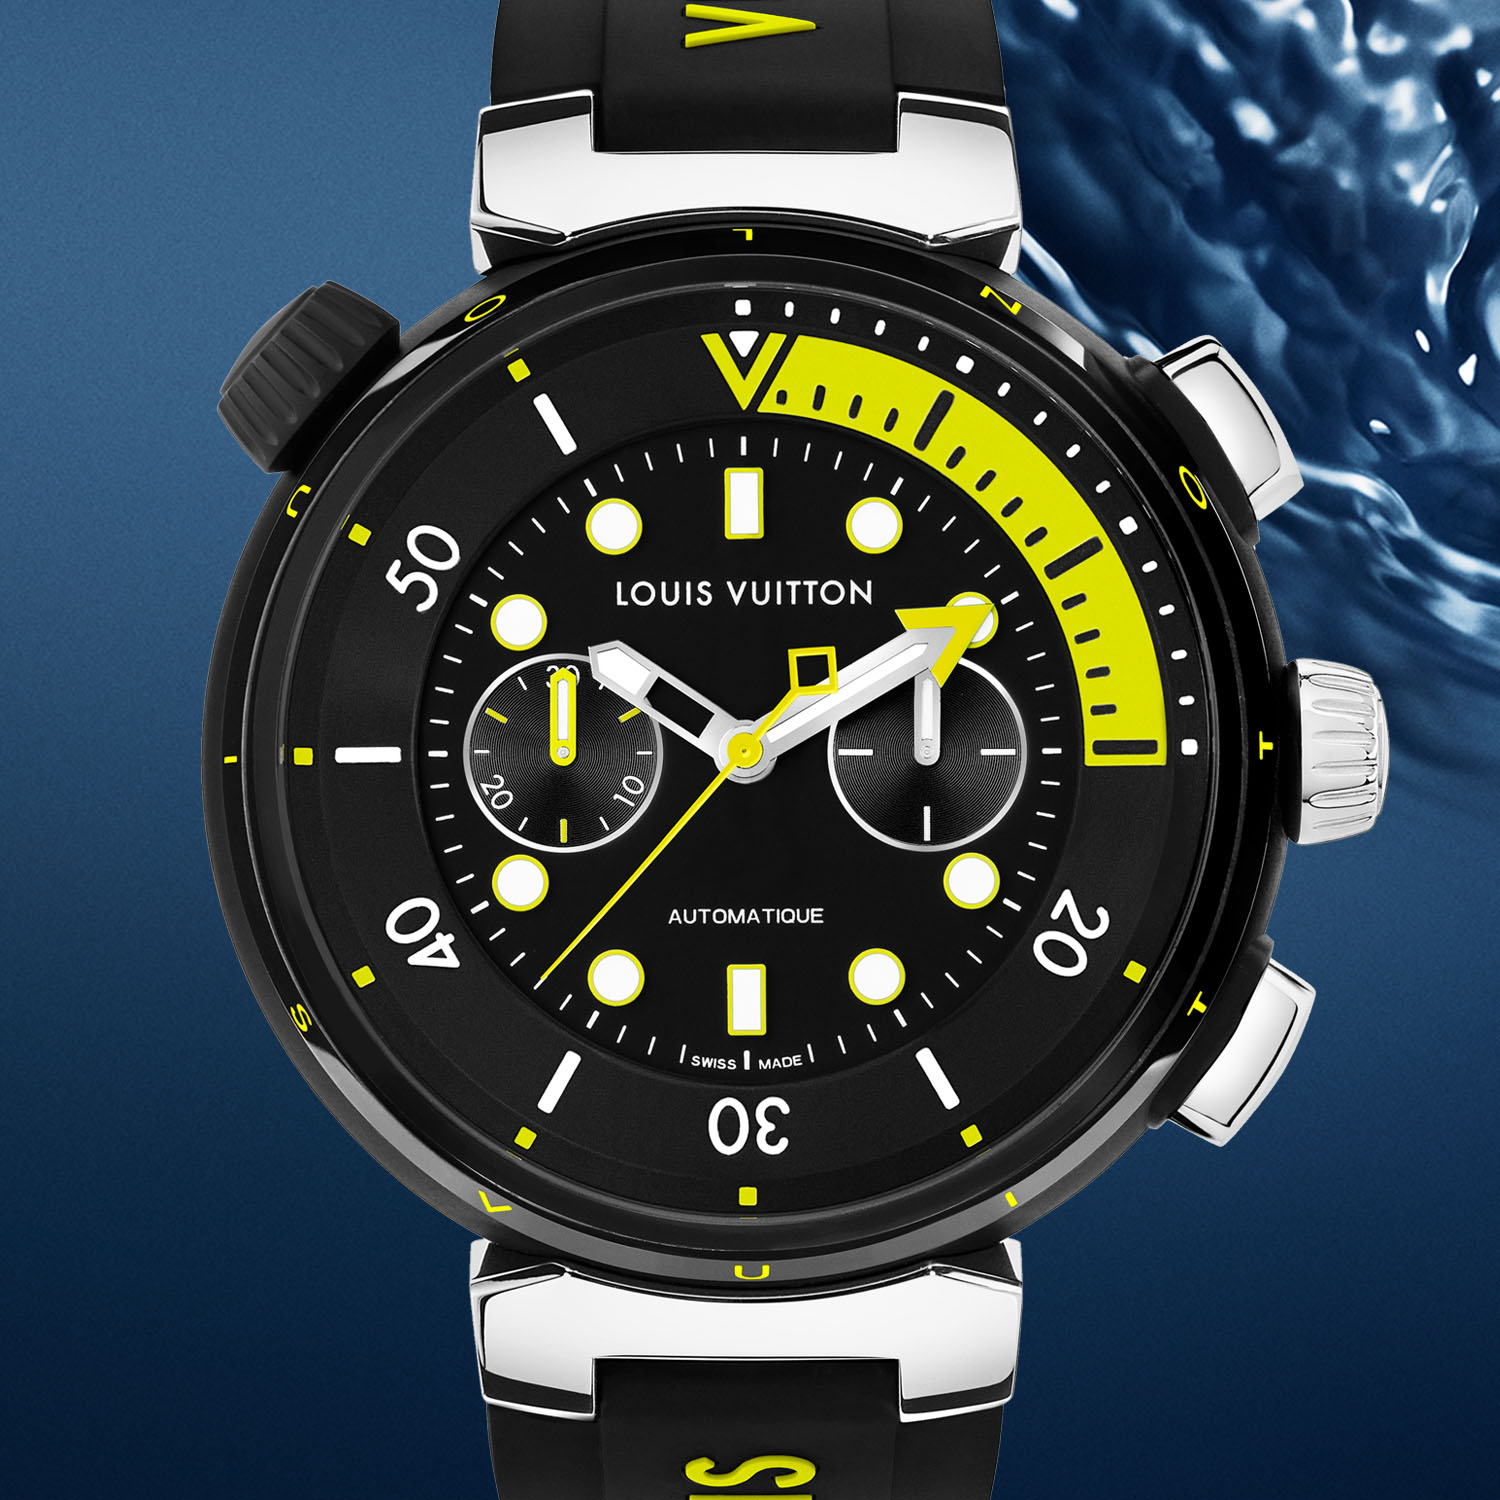 The Louis Vuitton Tambour Street Diver is a fresh alternative to the